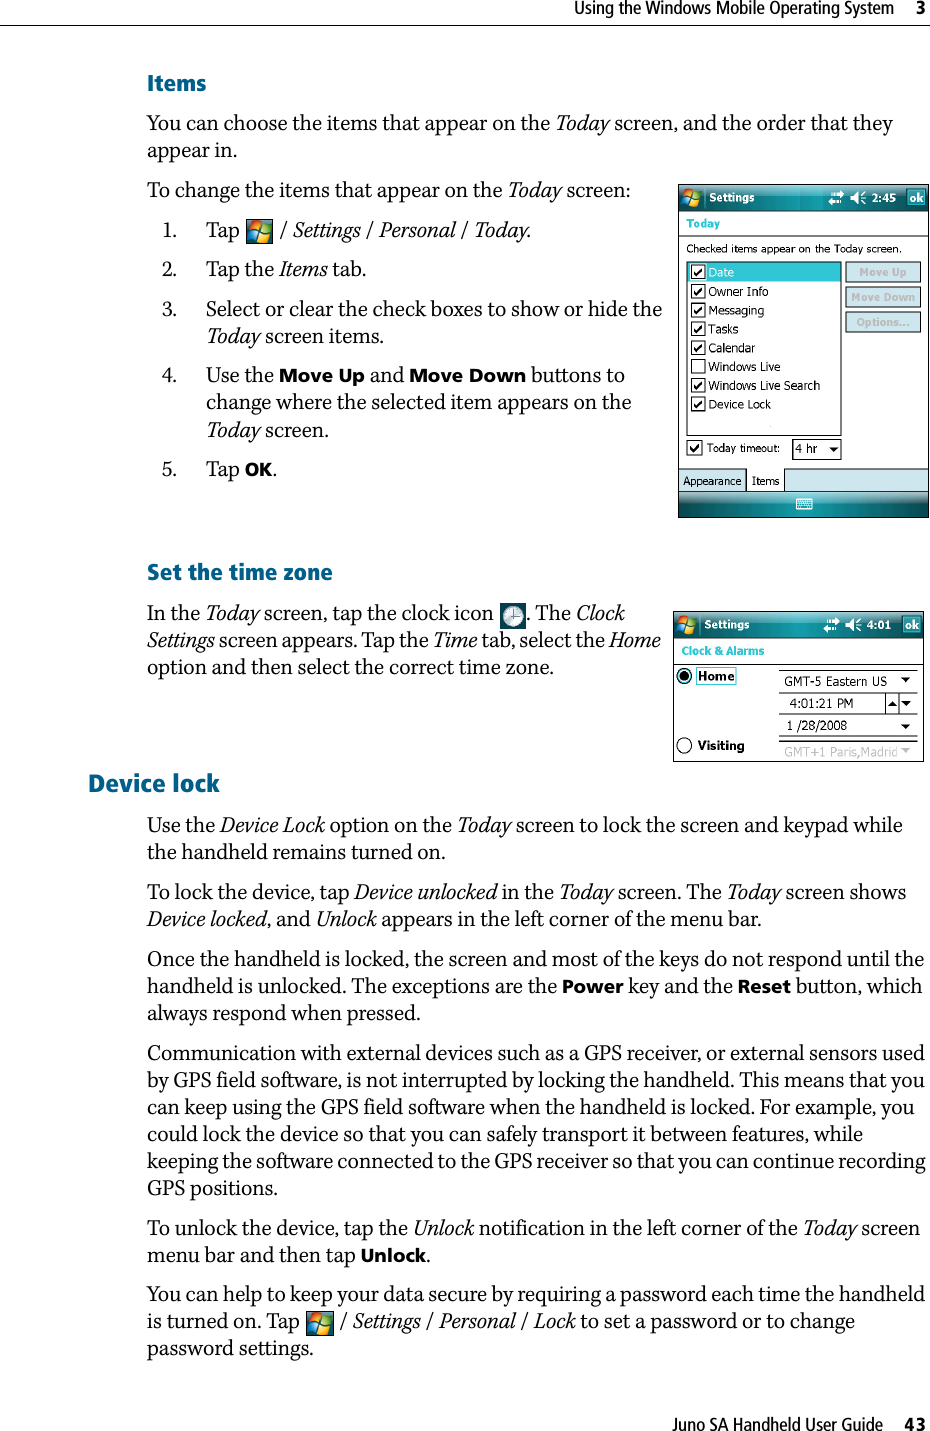 Juno SA Handheld User Guide     43Using the Windows Mobile Operating System     3ItemsYou can choose the items that appear on the Today screen, and the order that they appear in.To change the items that appear on the Today screen:1. Tap / Settings /Personal / Today.  2. Tap the Items tab.3. Select or clear the check boxes to show or hide the Today screen items.4. Use the Move Up and Move Down buttons to change where the selected item appears on the Today screen.5. Tap OK.Set the time zone In the Today screen, tap the clock icon . The Clock Settings screen appears. Tap the Time tab, select the Home option and then select the correct time zone.Device lockUse the Device Lock option on the Today screen to lock the screen and keypad while the handheld remains turned on.To lock the device, tap Device unlocked in the Today screen. The Today screen shows Device locked, and Unlock appears in the left corner of the menu bar.Once the handheld is locked, the screen and most of the keys do not respond until the handheld is unlocked. The exceptions are the Power key and the Reset button, which always respond when pressed.Communication with external devices such as a GPS receiver, or external sensors used by GPS field software, is not interrupted by locking the handheld. This means that you can keep using the GPS field software when the handheld is locked. For example, you could lock the device so that you can safely transport it between features, while keeping the software connected to the GPS receiver so that you can continue recording GPS positions.To unlock the device, tap the Unlock notification in the left corner of the Today screen menu bar and then tap Unlock. You can help to keep your data secure by requiring a password each time the handheld is turned on. Tap  / Settings /Personal / Lock to set a password or to change password settings.